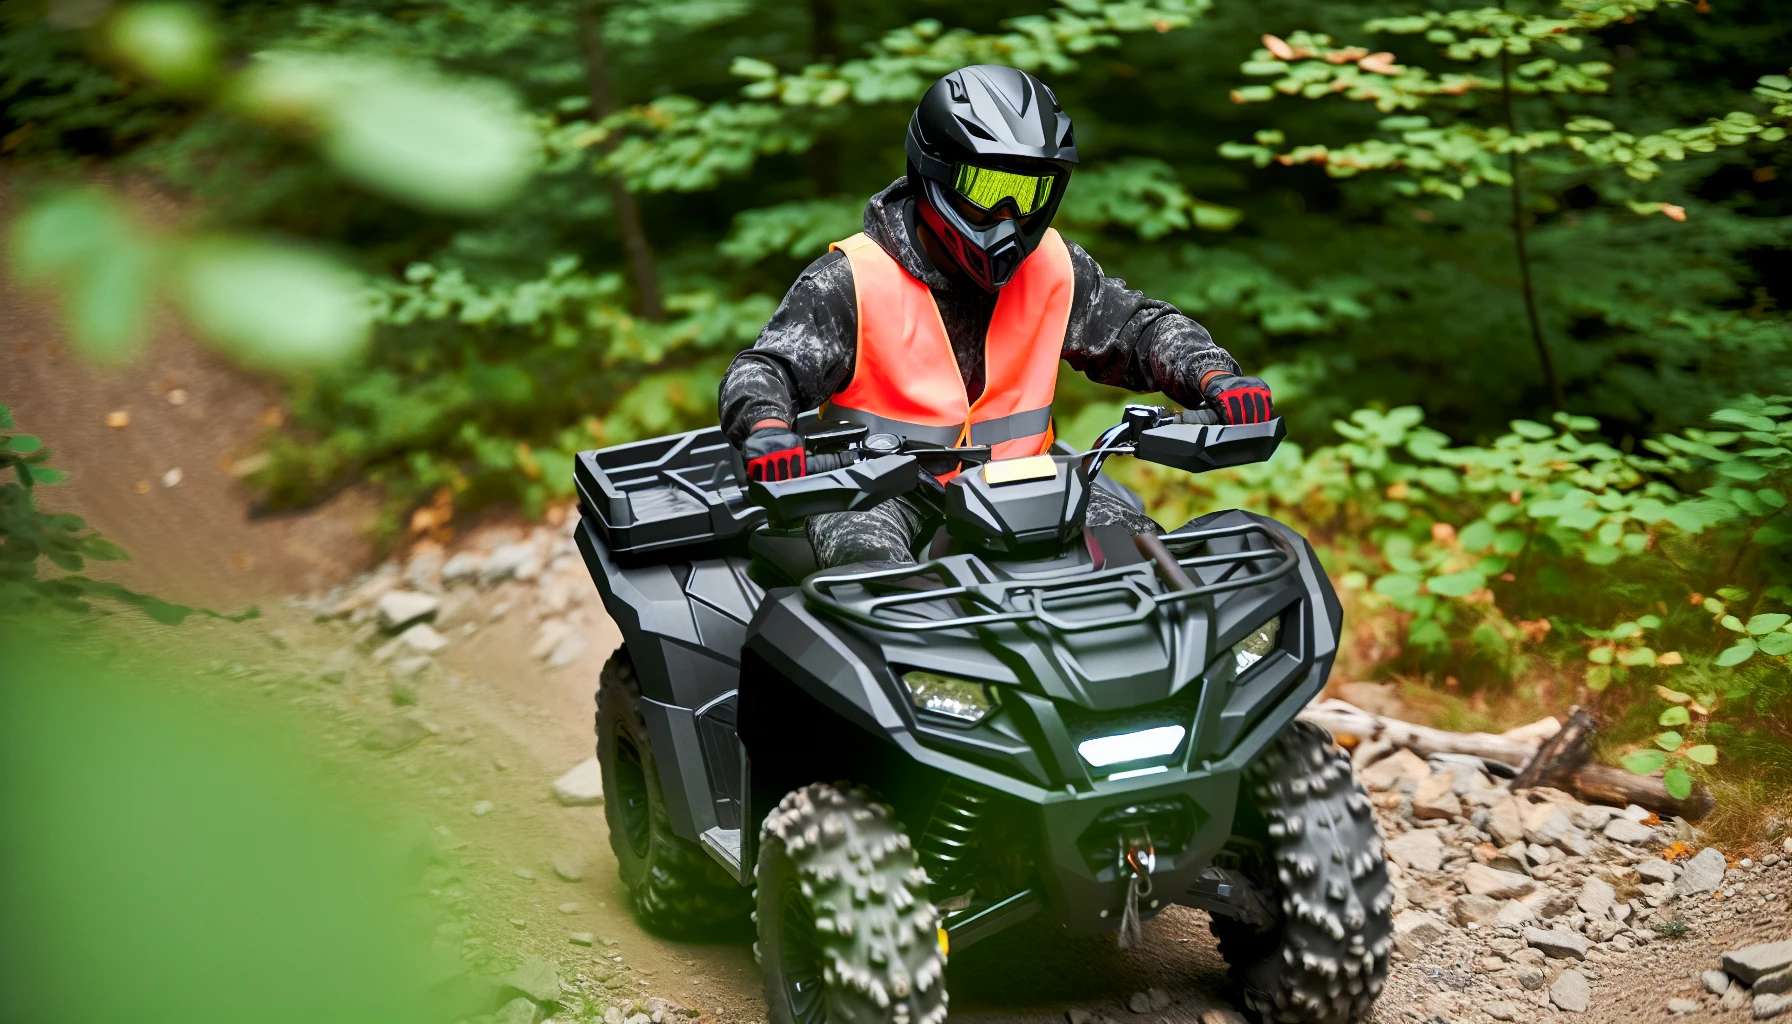 Rider wearing protective gear on a side by side ATV